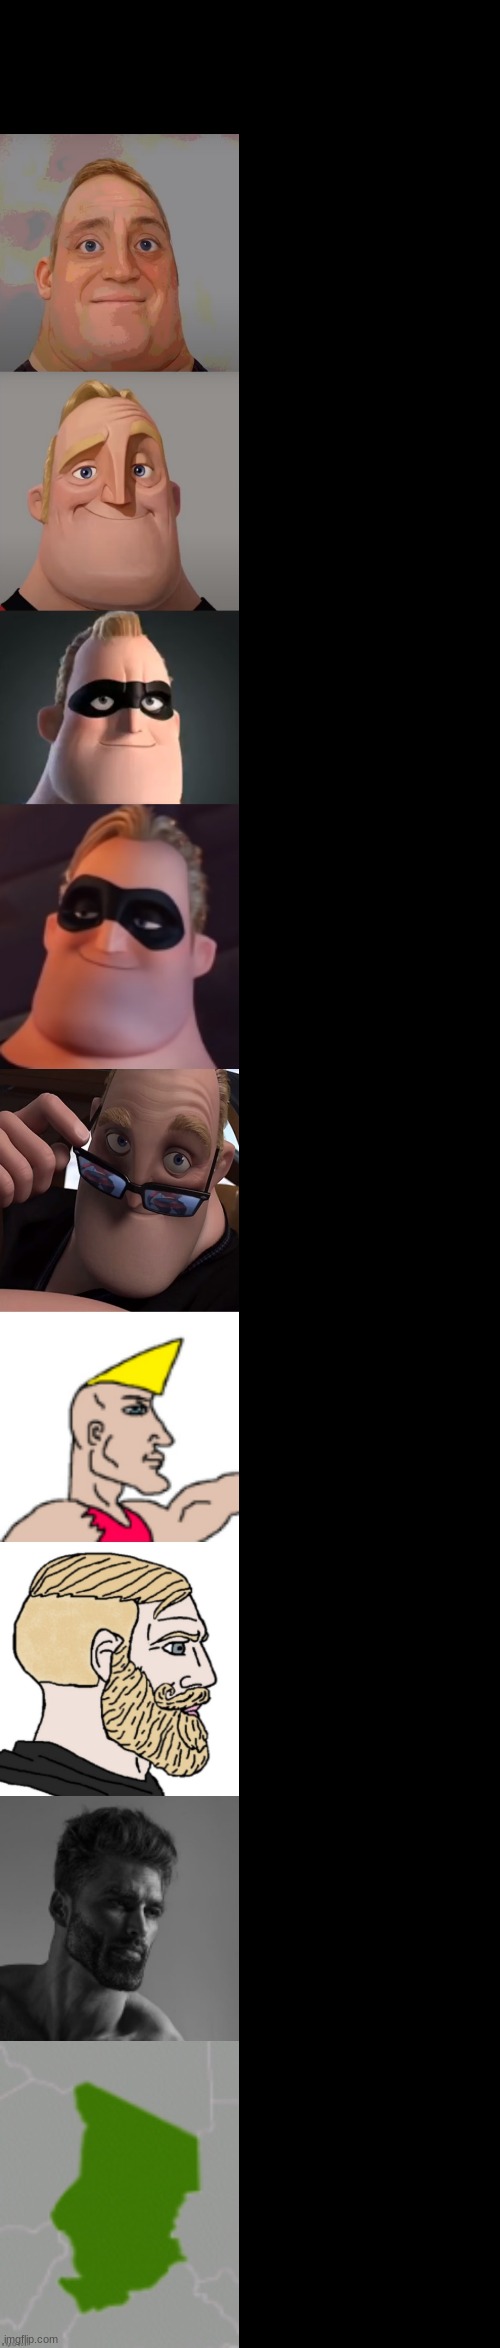 High Quality Mr Incredible becoming chad Blank Meme Template